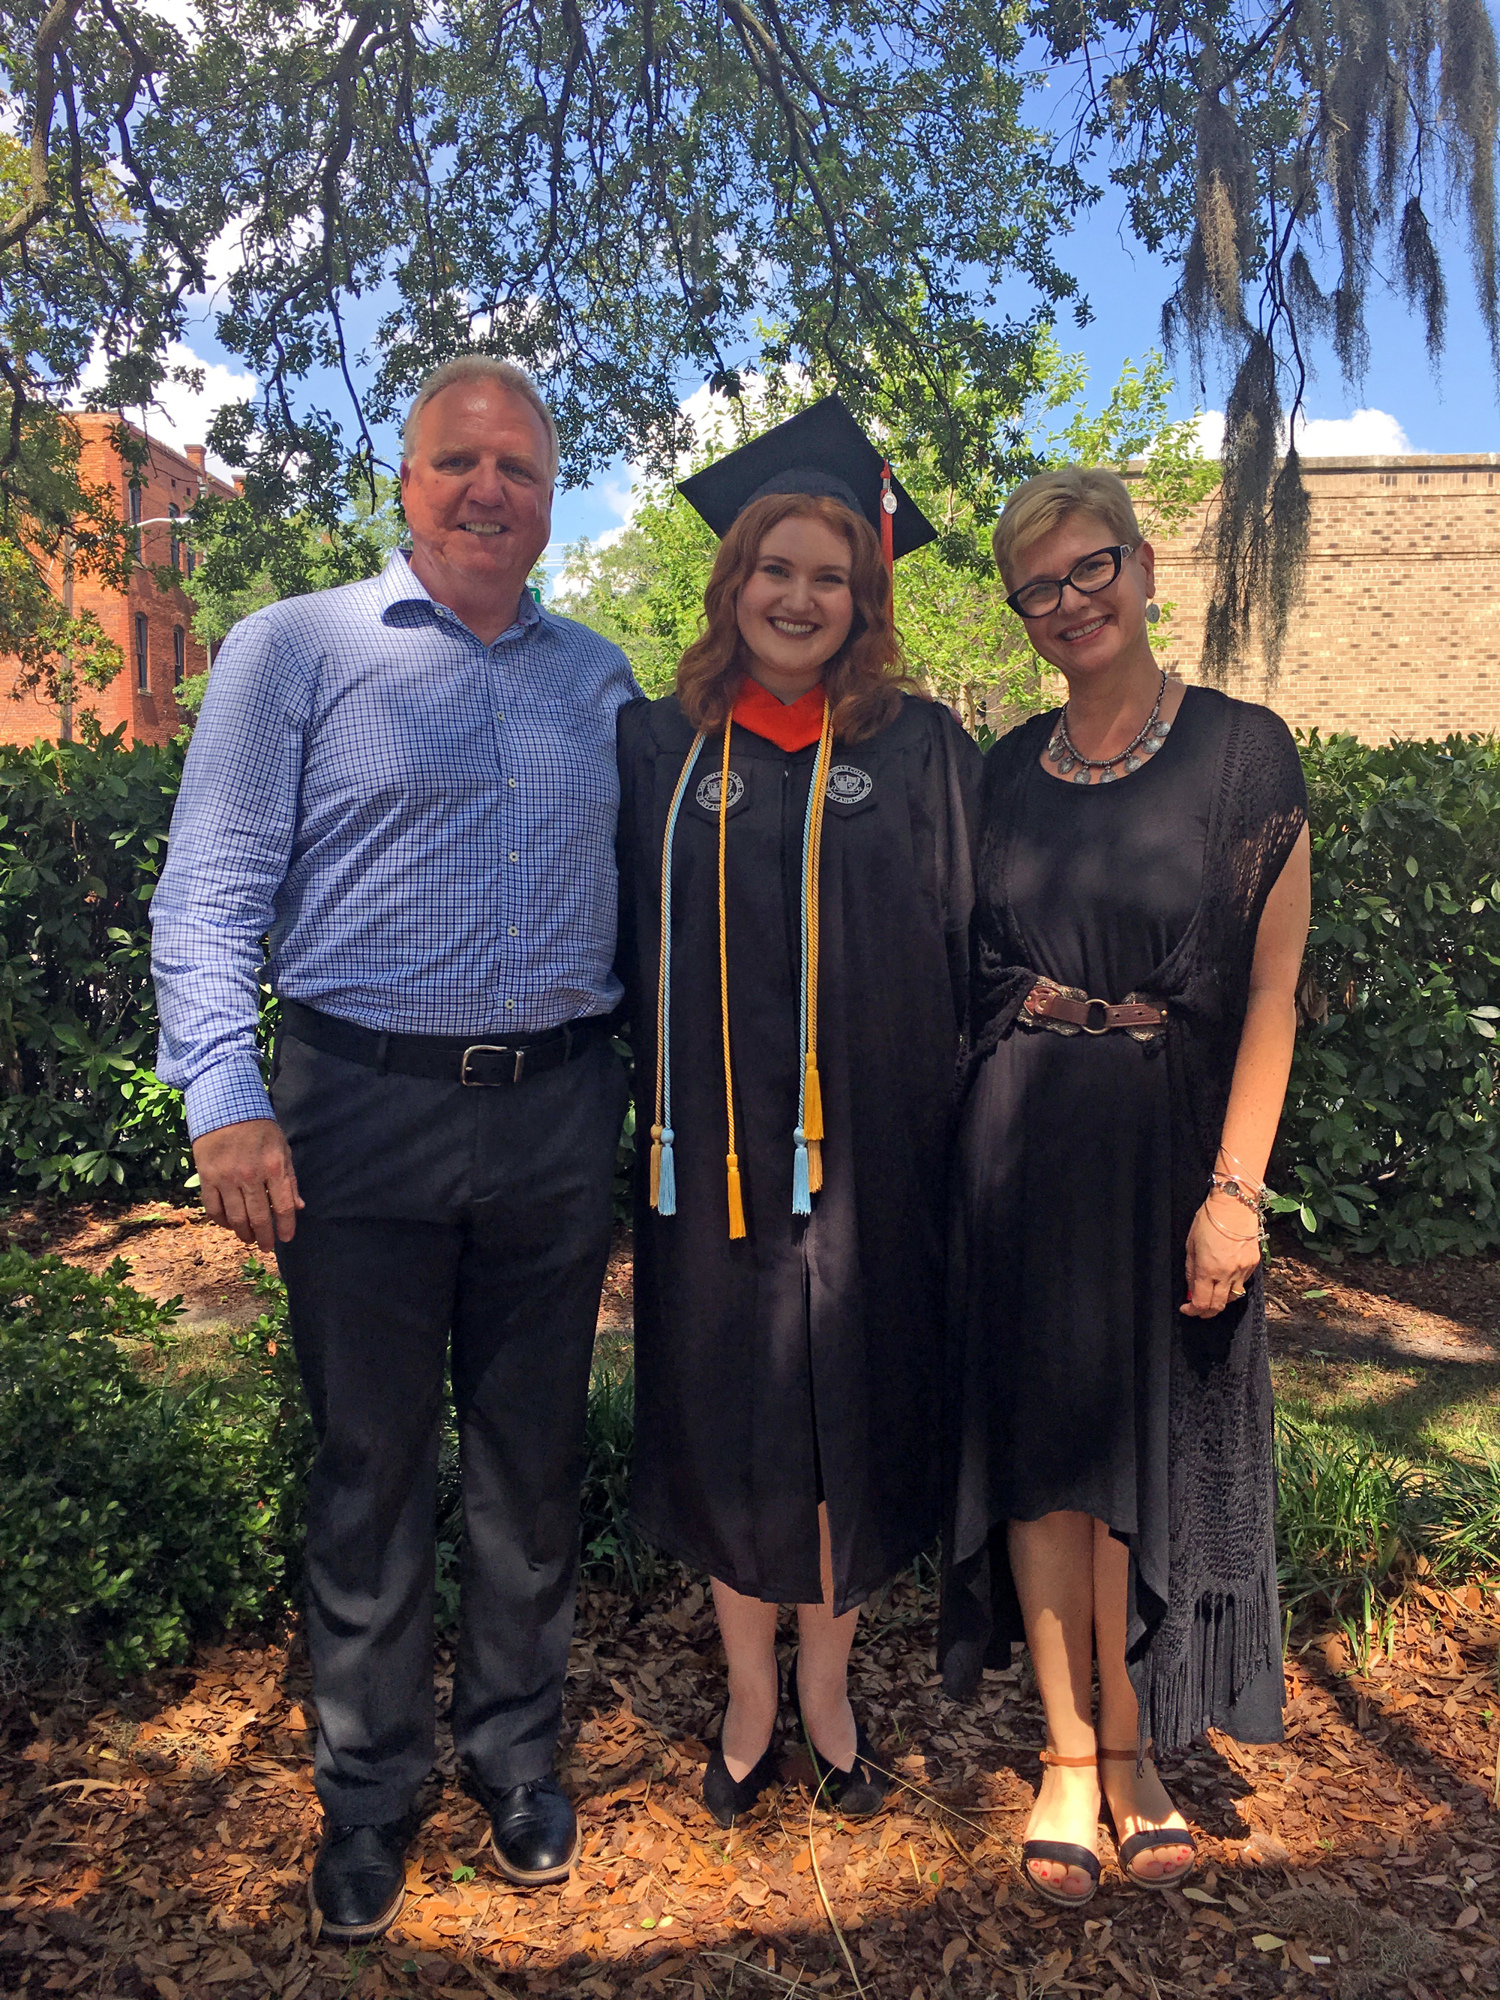 David and Kim Minichiello were present for daughter Alaina’s graduation from The Savannah College of Art and Design in 2017.